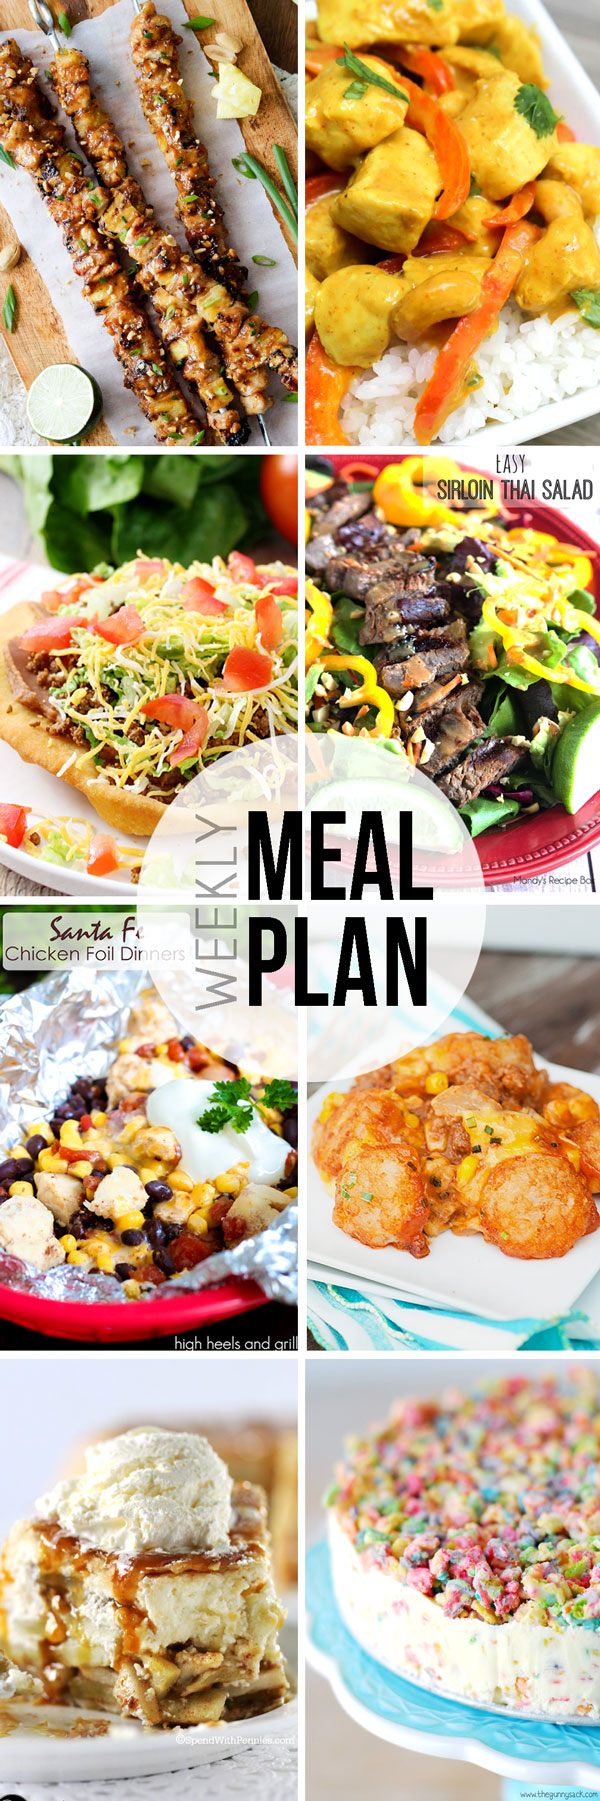 Easy Meal Plan Sunday #6.